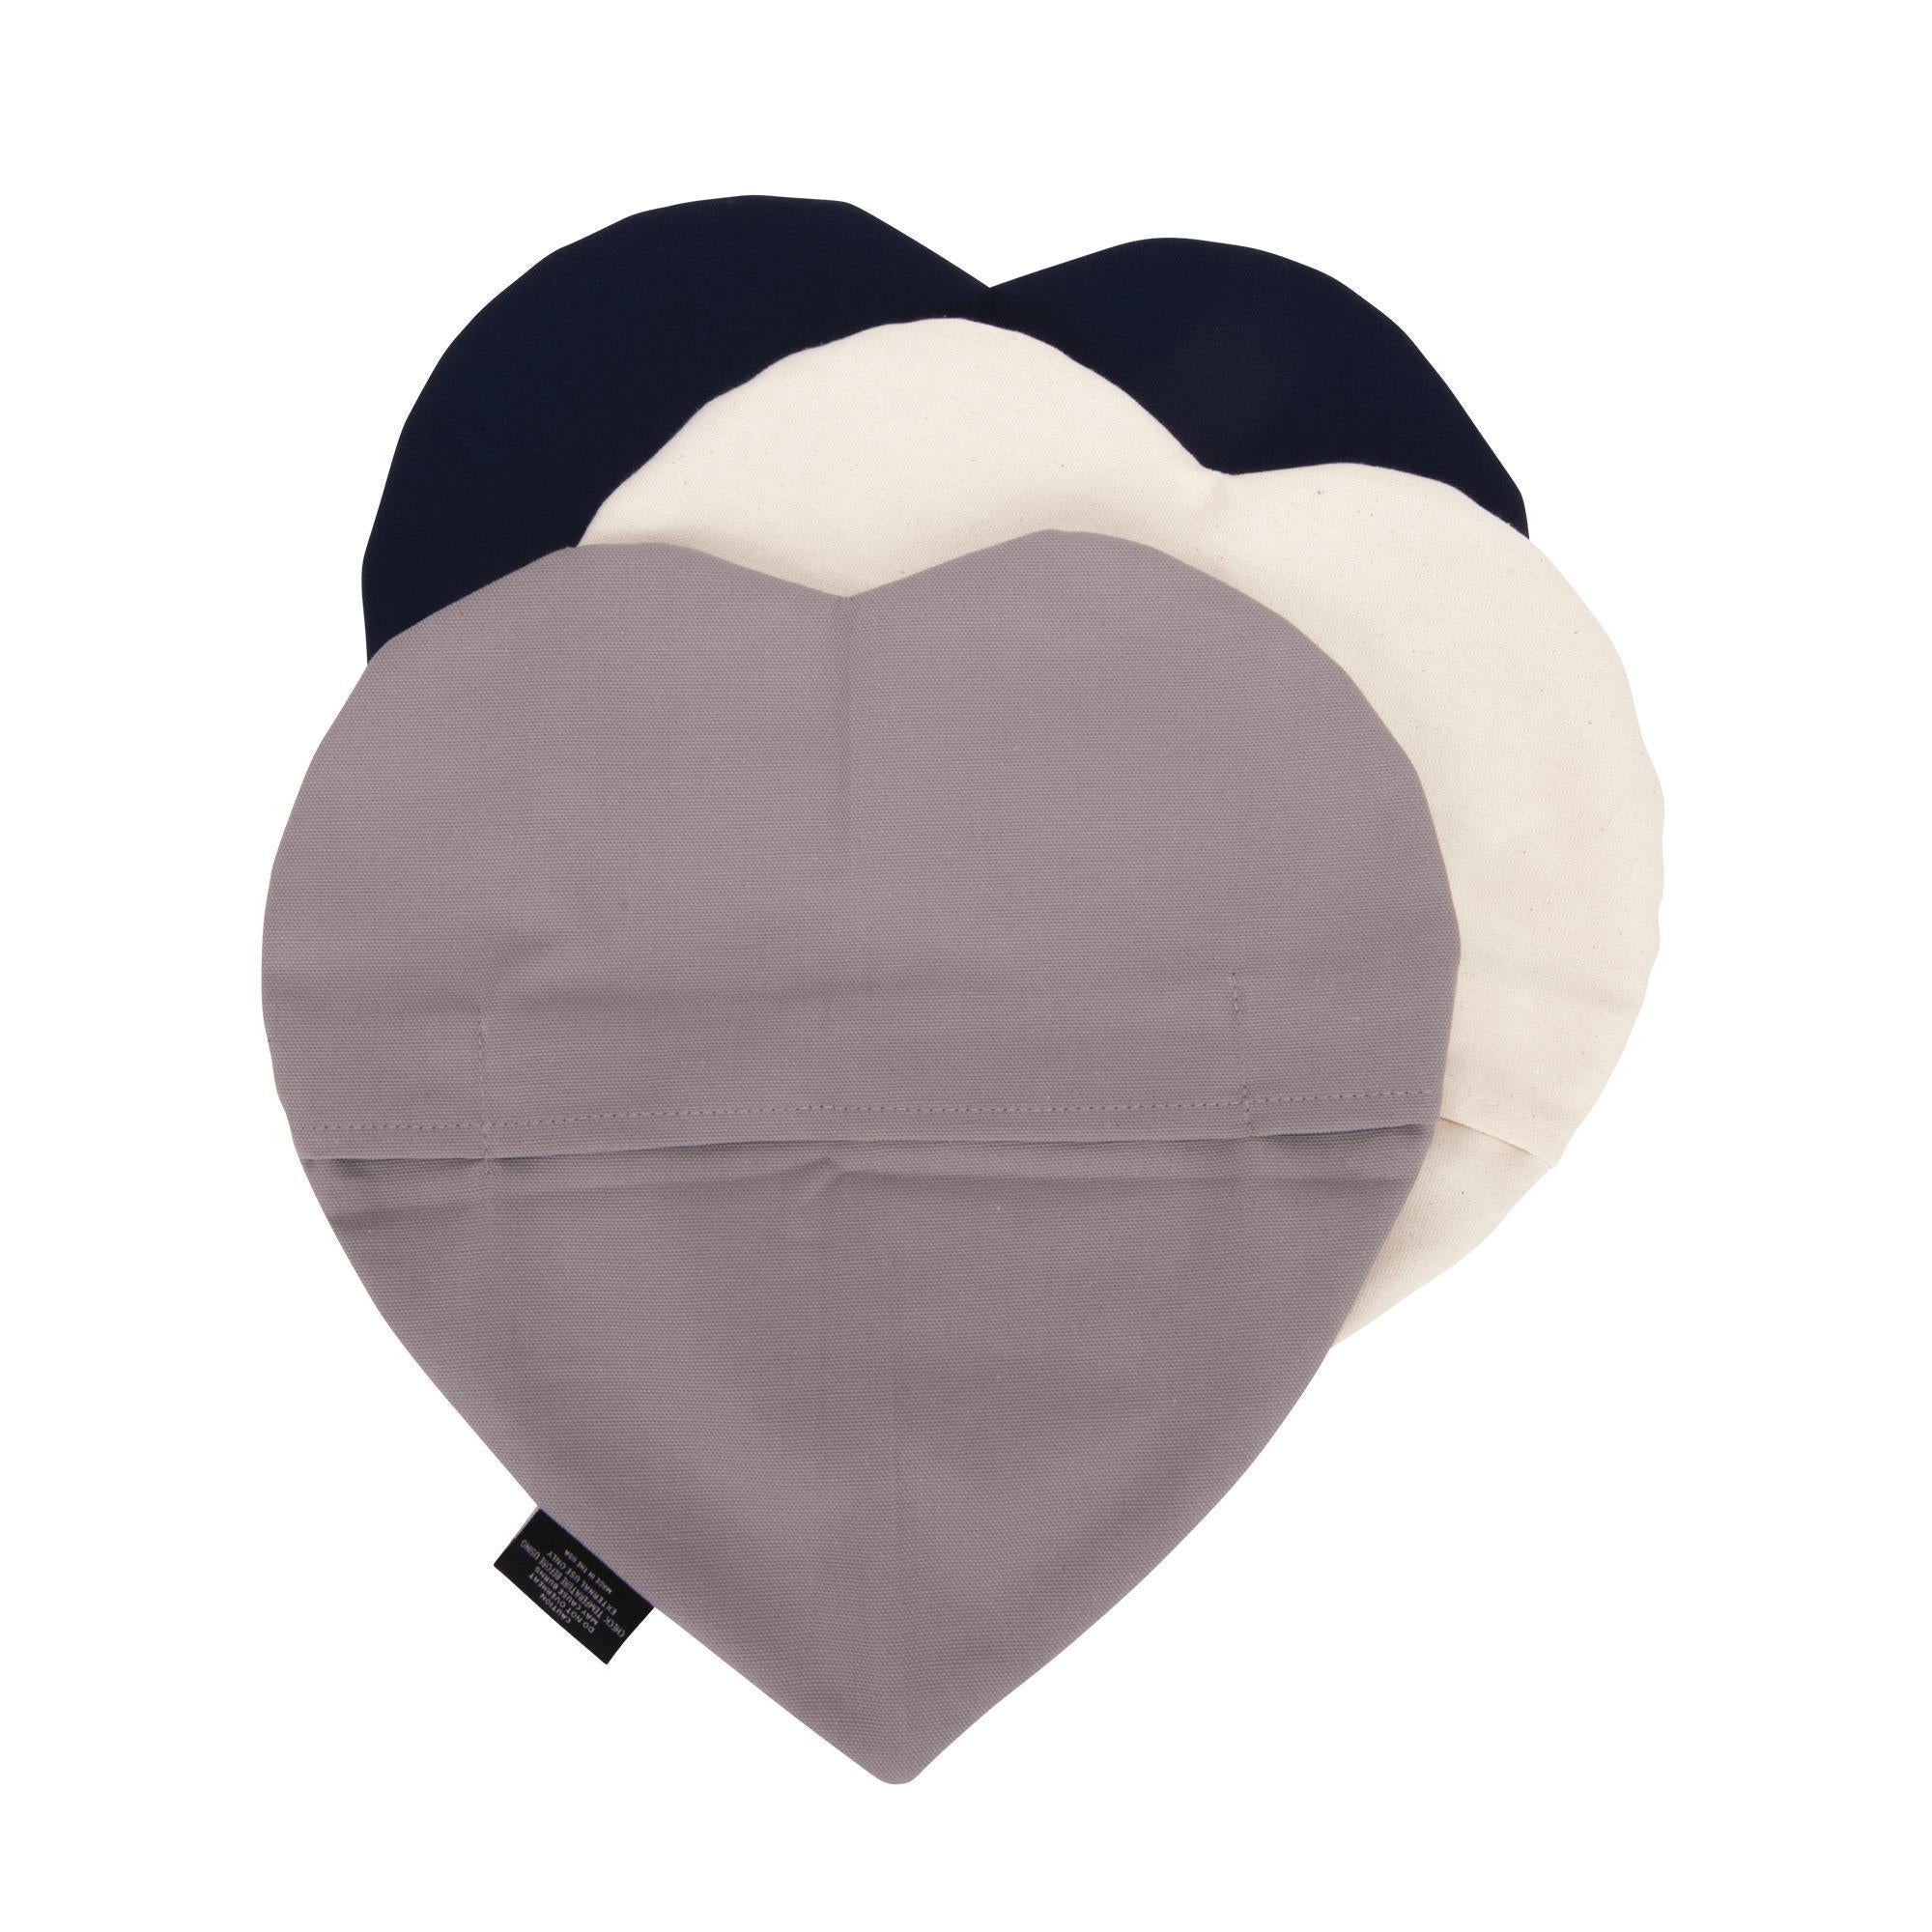 Therapy Wraps & Packs Sposh Heart-Shaped Heat Pack Replacement Covers